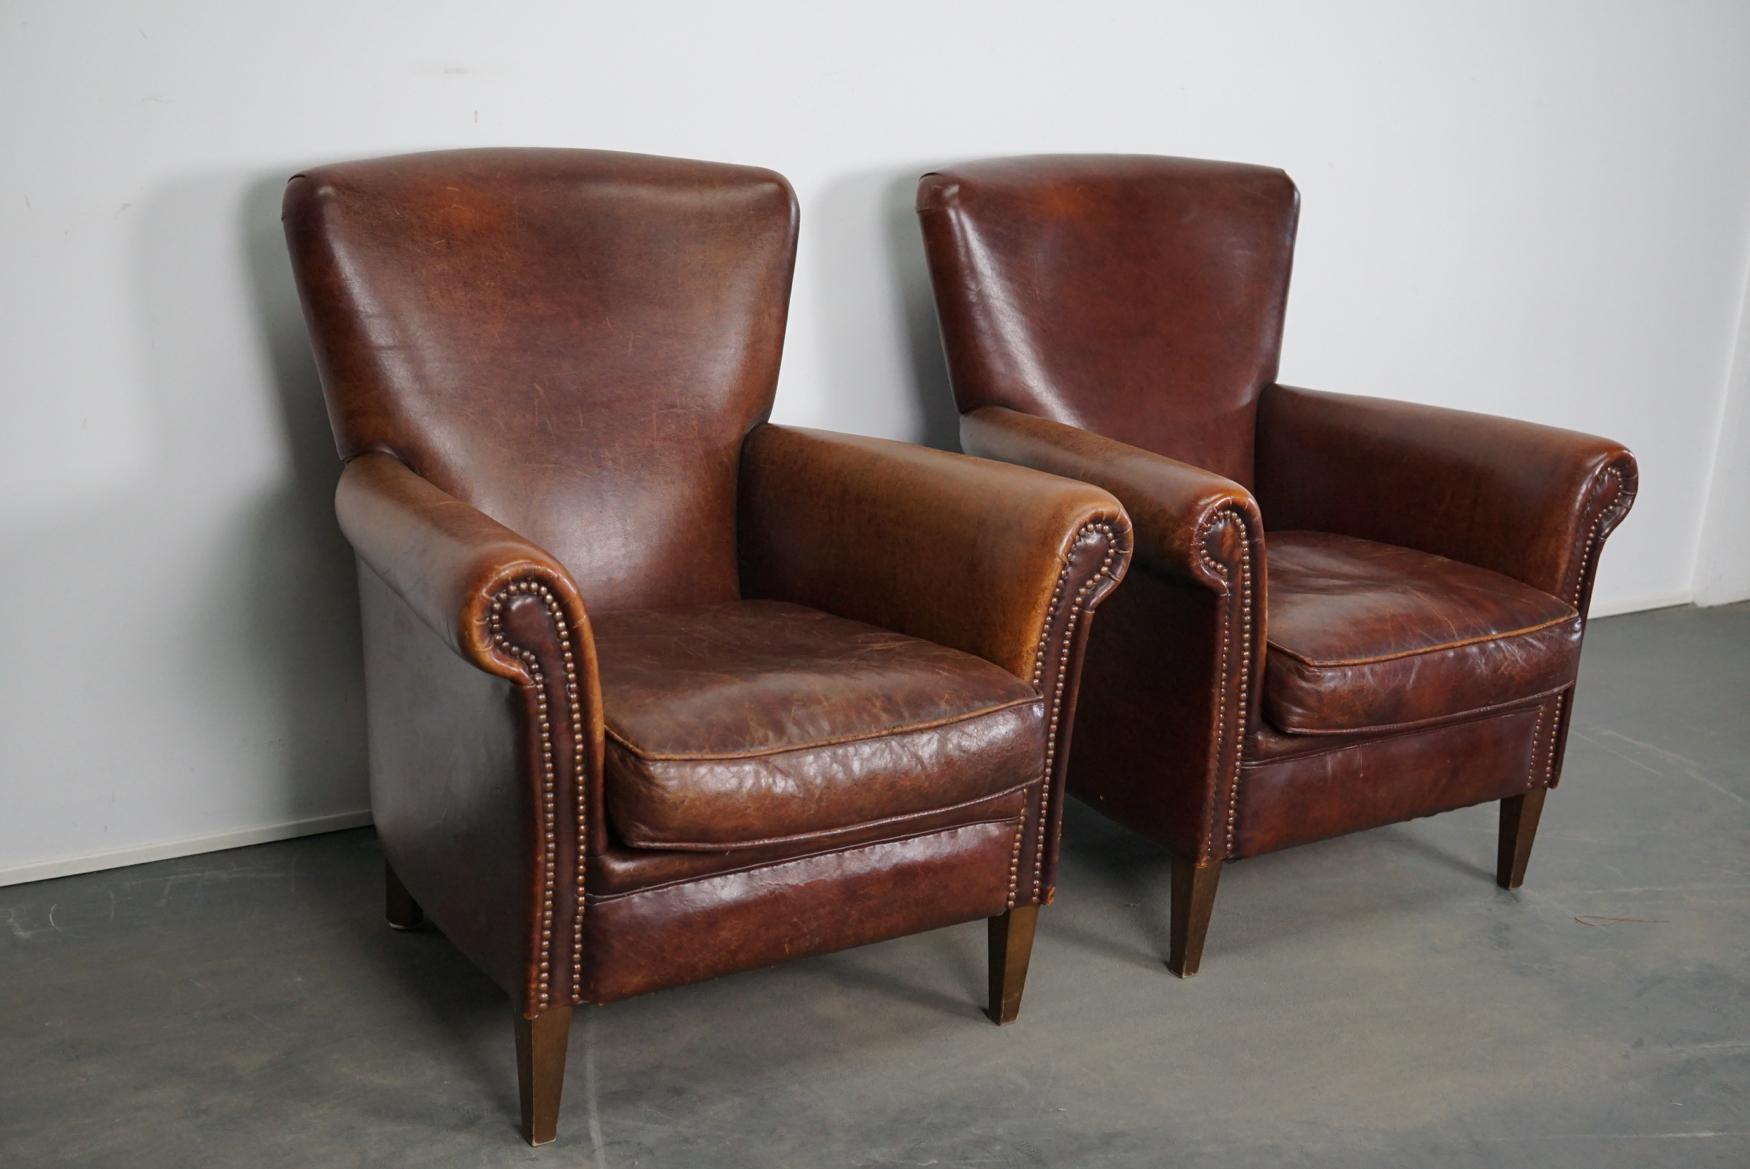 This pair of leather club chairs come from the Netherlands. They are upholstered with Bordeaux / cognac-colored leather and feature metal rivets and wooden legs. They are very comfortable.